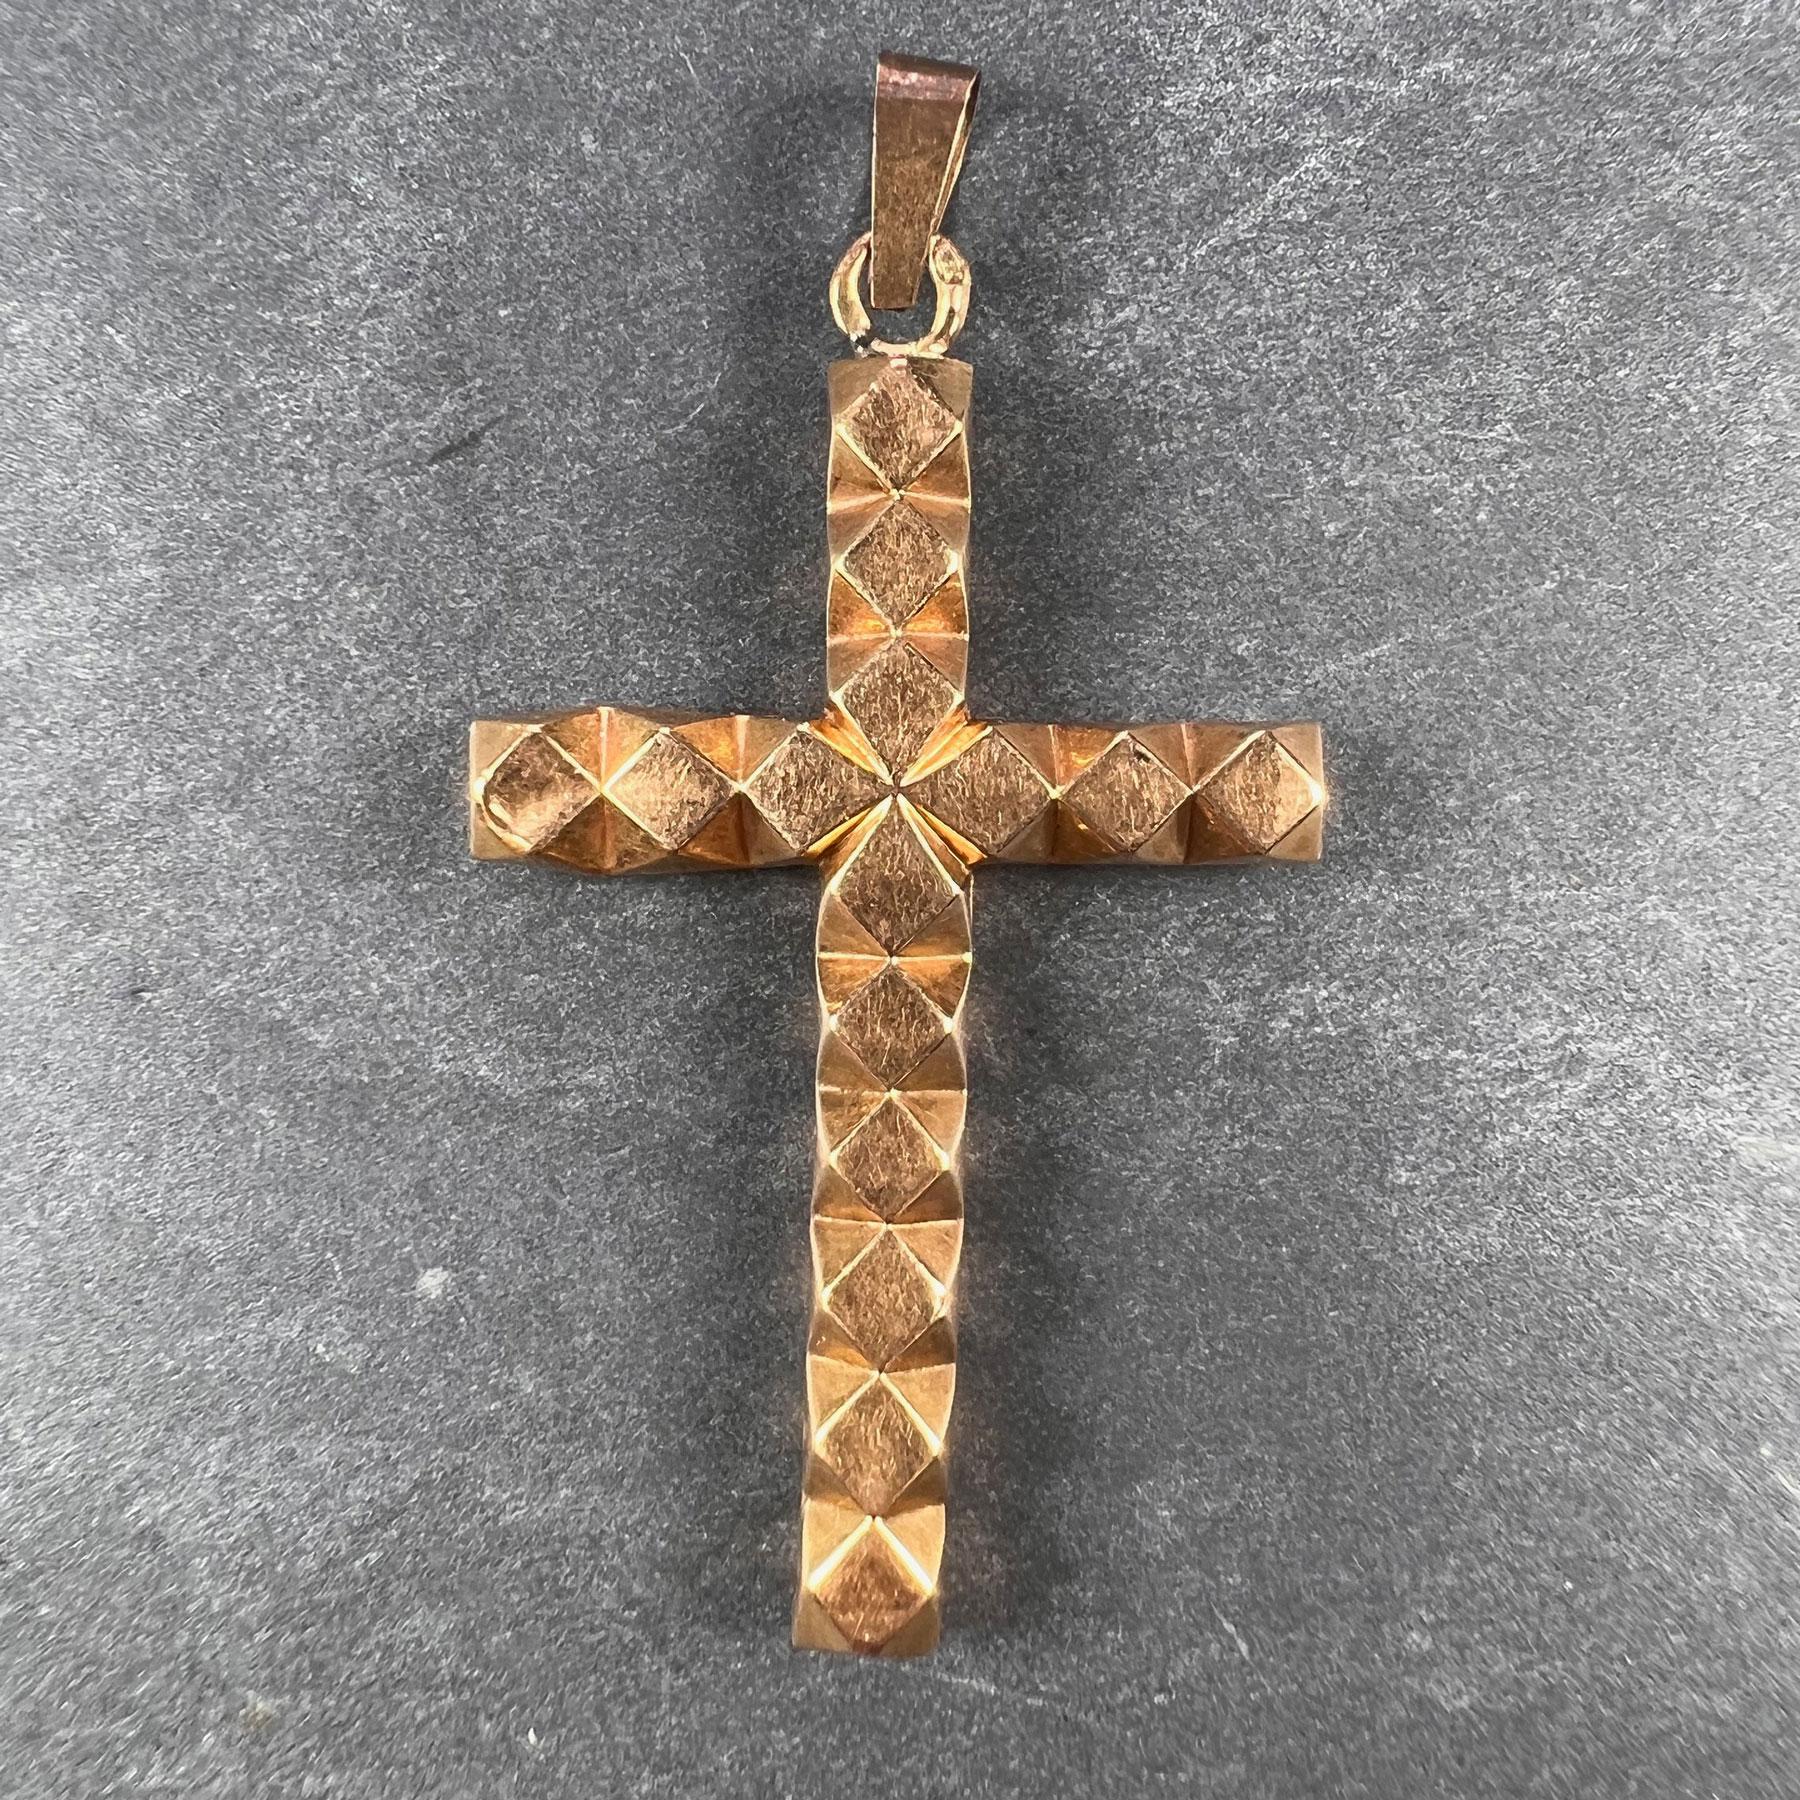 A 18 karat (18K) yellow gold pendant designed as a cross with diamond shapes throughout. Stamped with the owl mark for 18 karat gold and French import.

Dimensions: 3.7 x 2.2 x 0.35 cm (not including jump ring)
Weight: 0.90 grams 
(Chain not